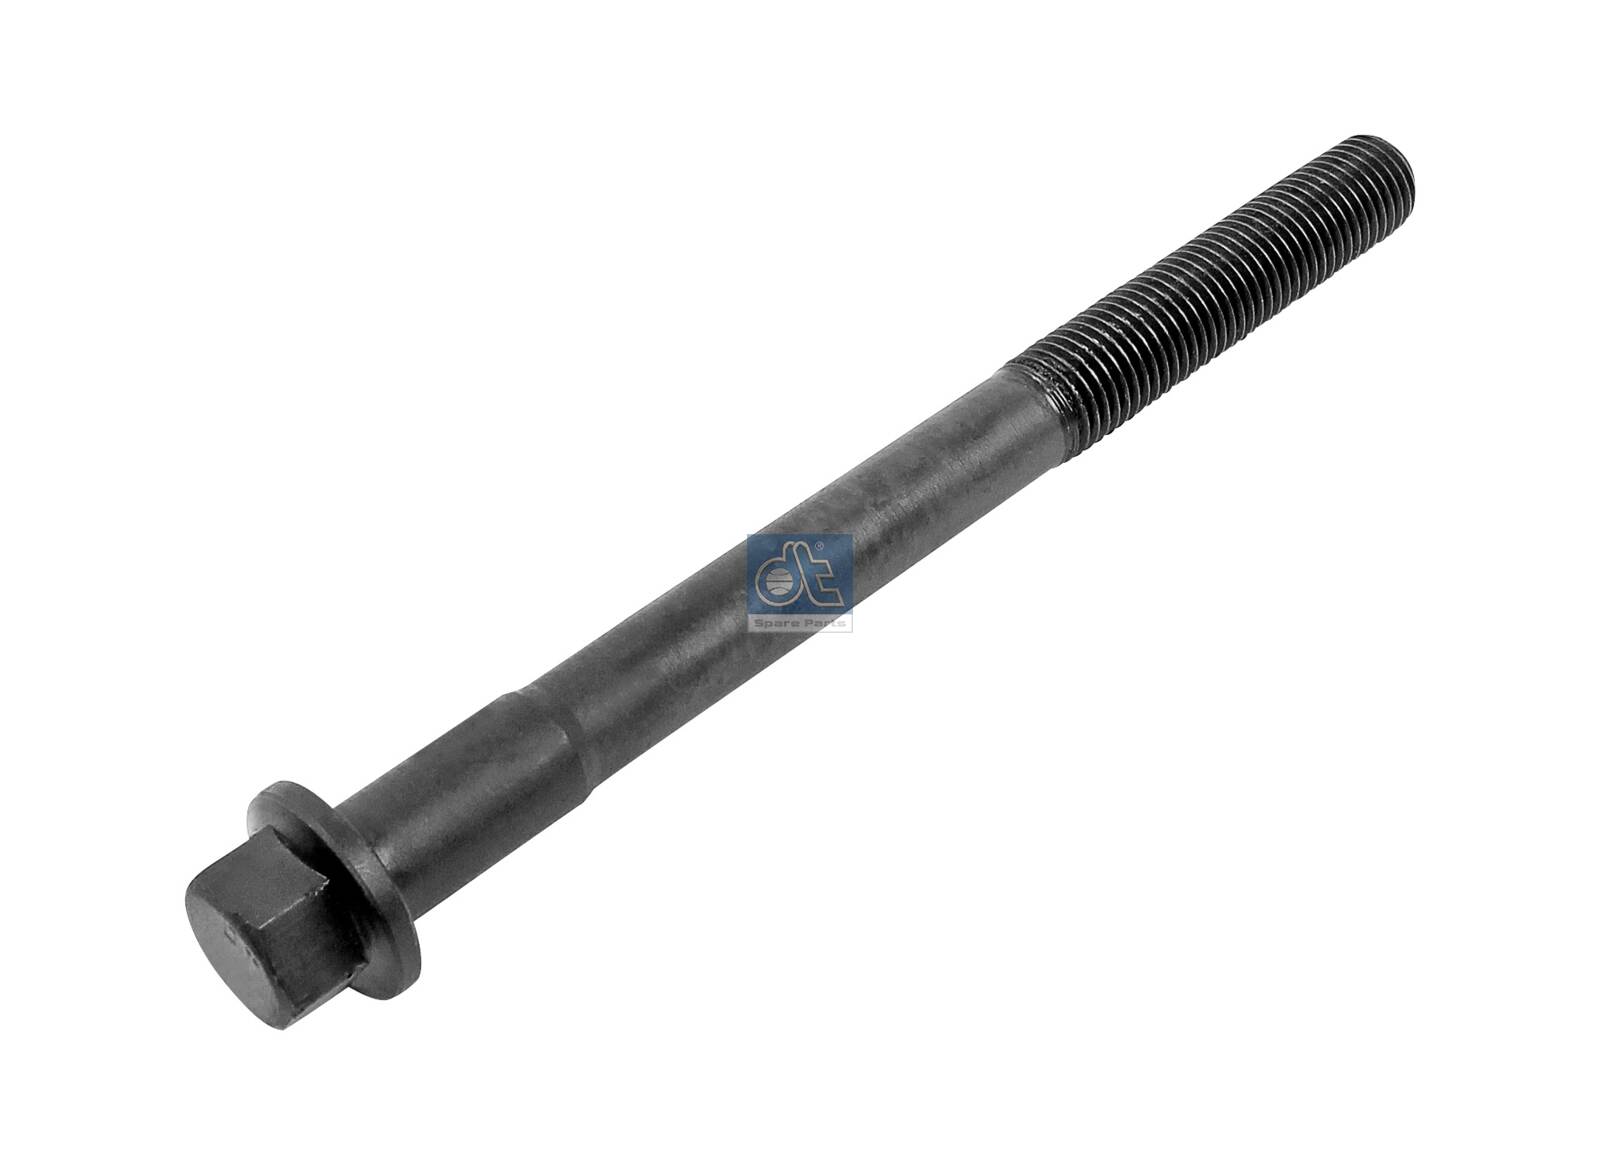 1.10788, Cylinder Head Bolt, DT Spare Parts, 1333786, 1451946, 1852442, 2212238, 009766, 04.67.005, 047.033, 102198, 104206, 125.980, 14-32285-01, 200807DC009, 480164, 10428, 125990, TPB-238